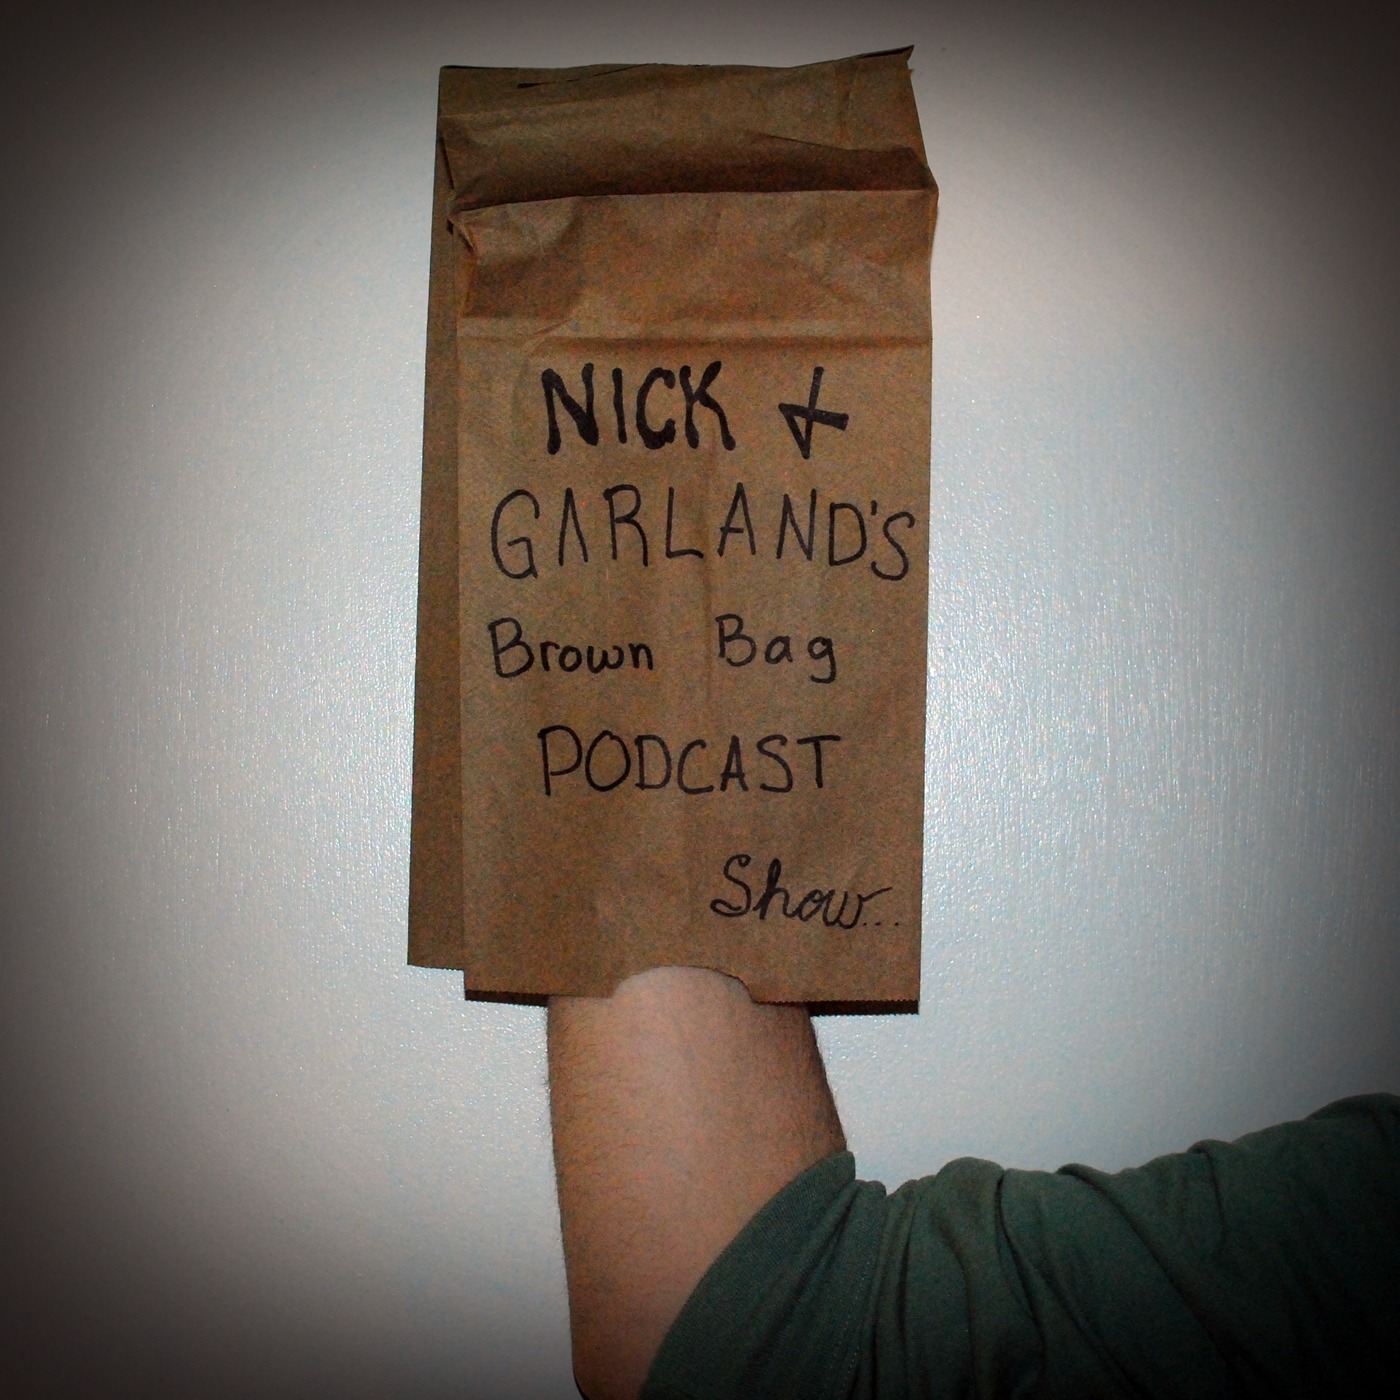 Nick and Garland's Brown Bag Podcast Show